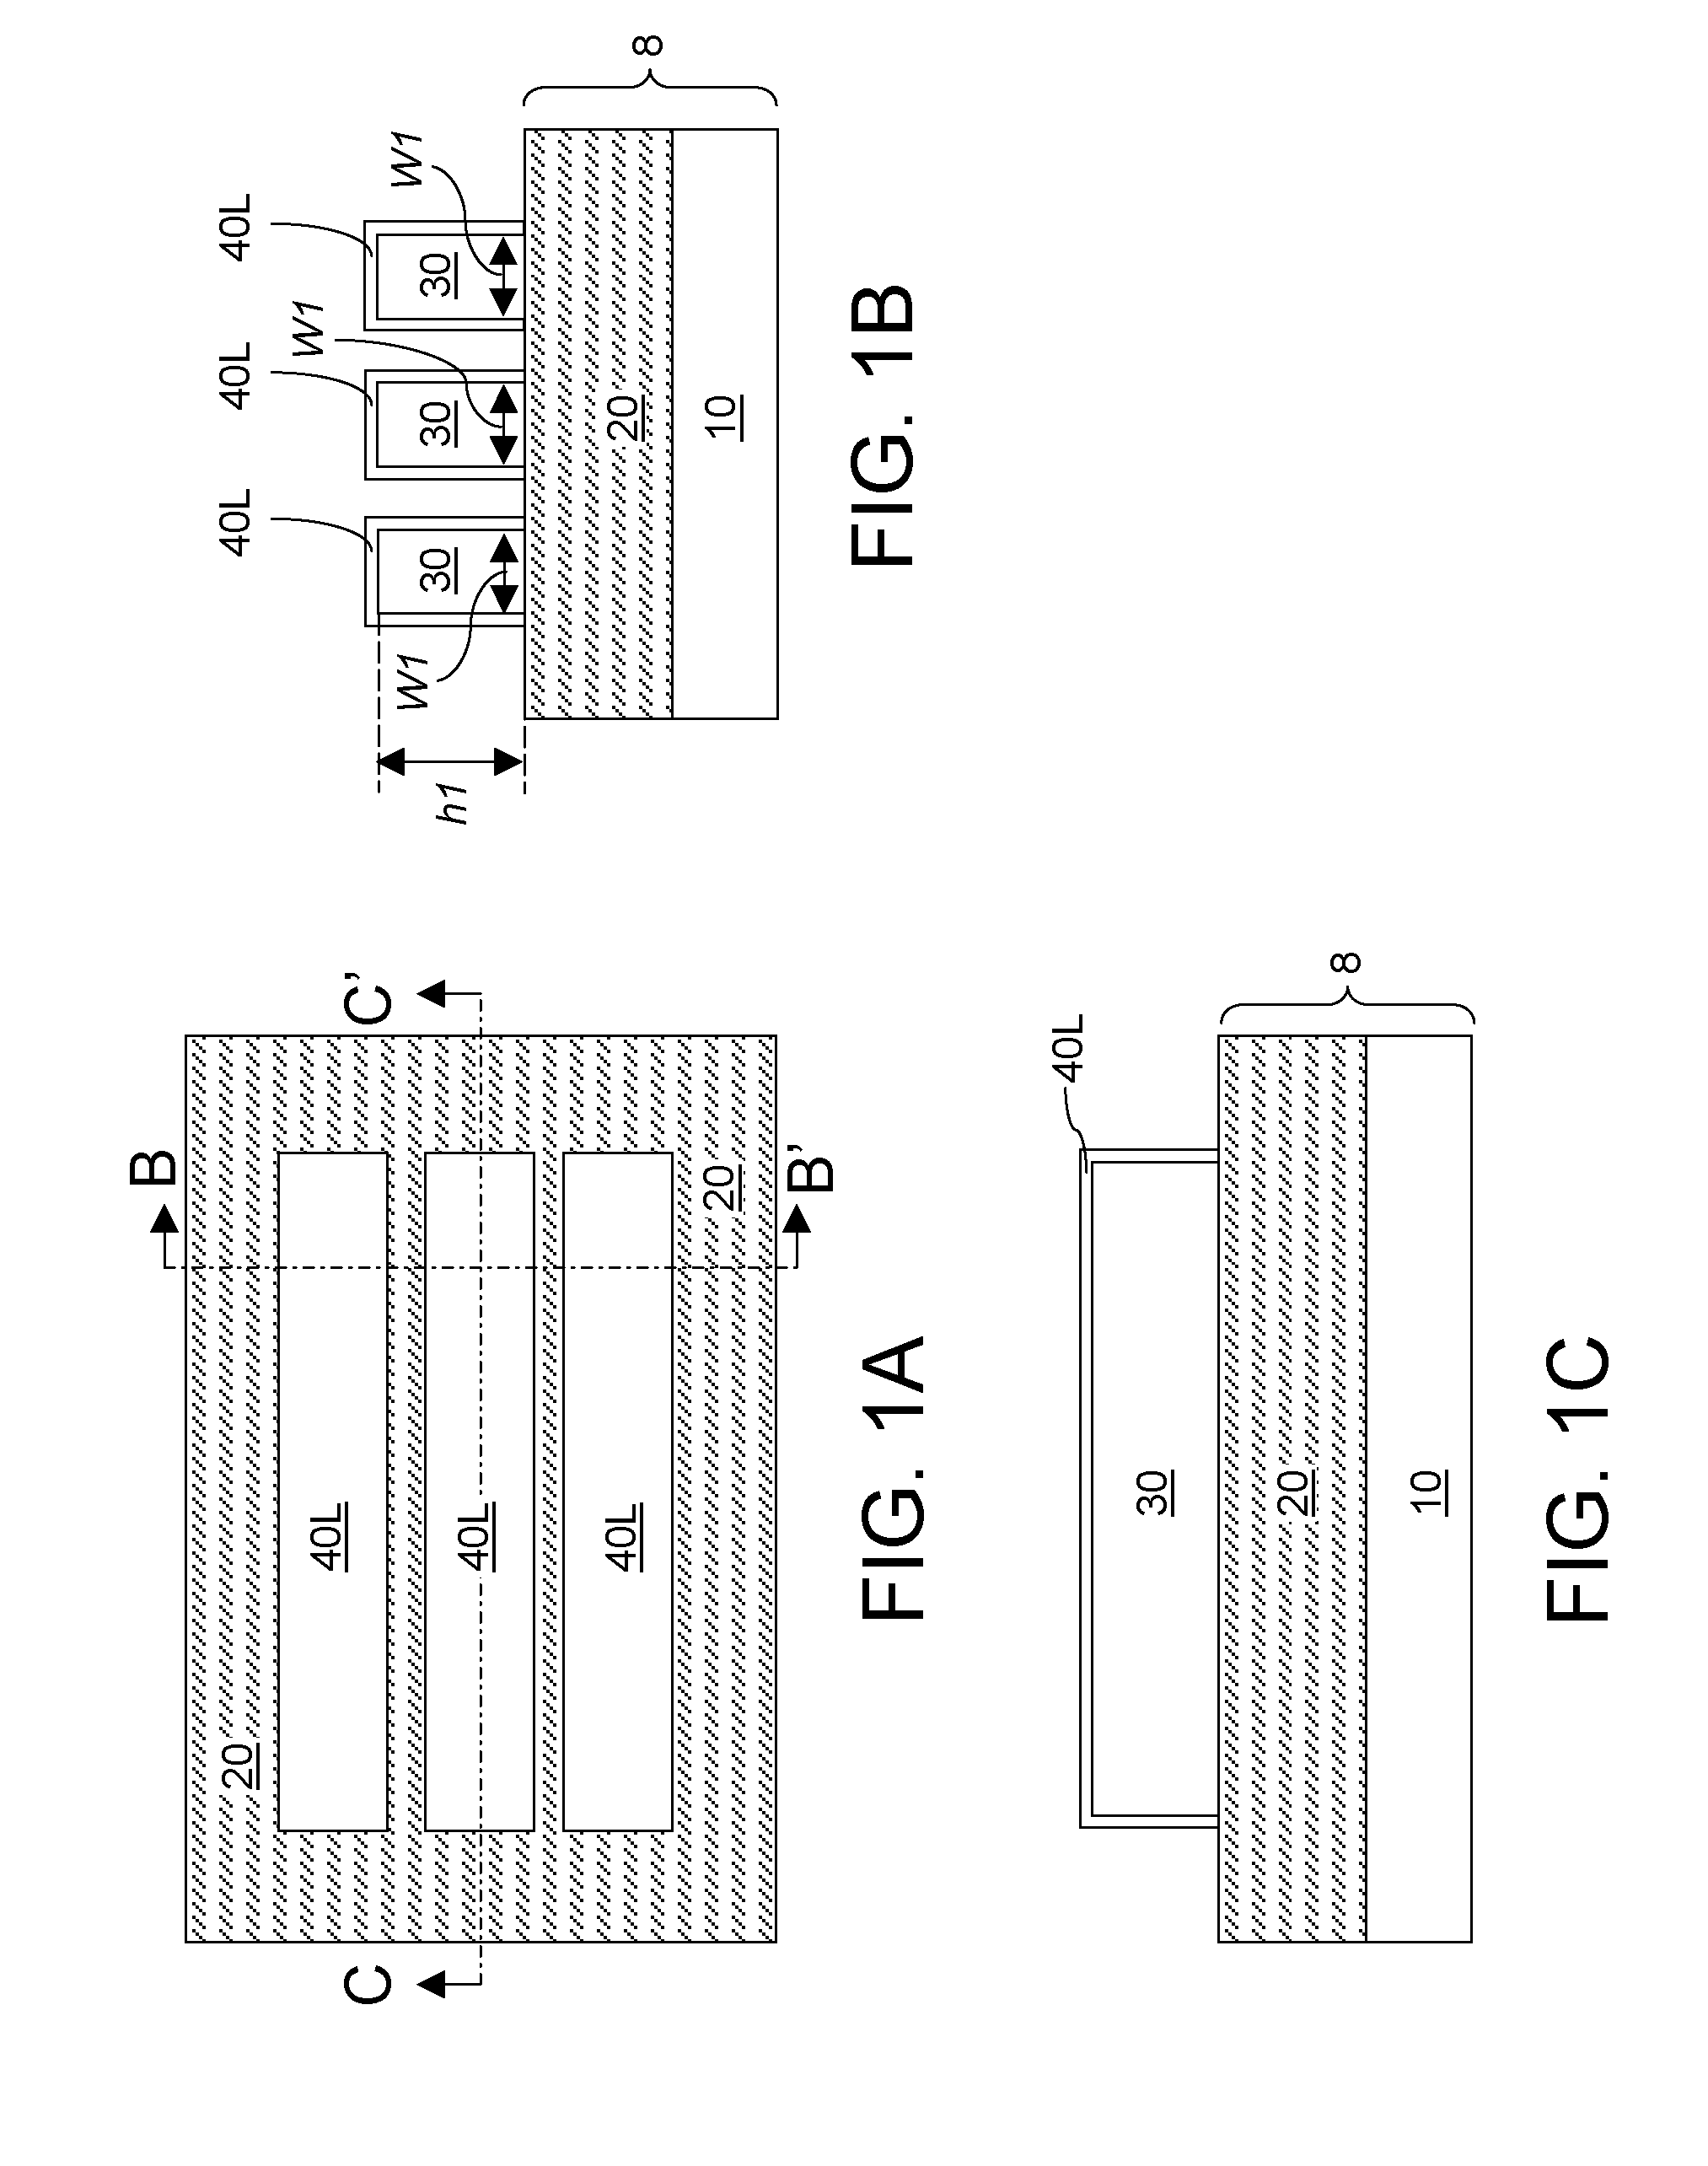 Finfet with longitudinal stress in a channel